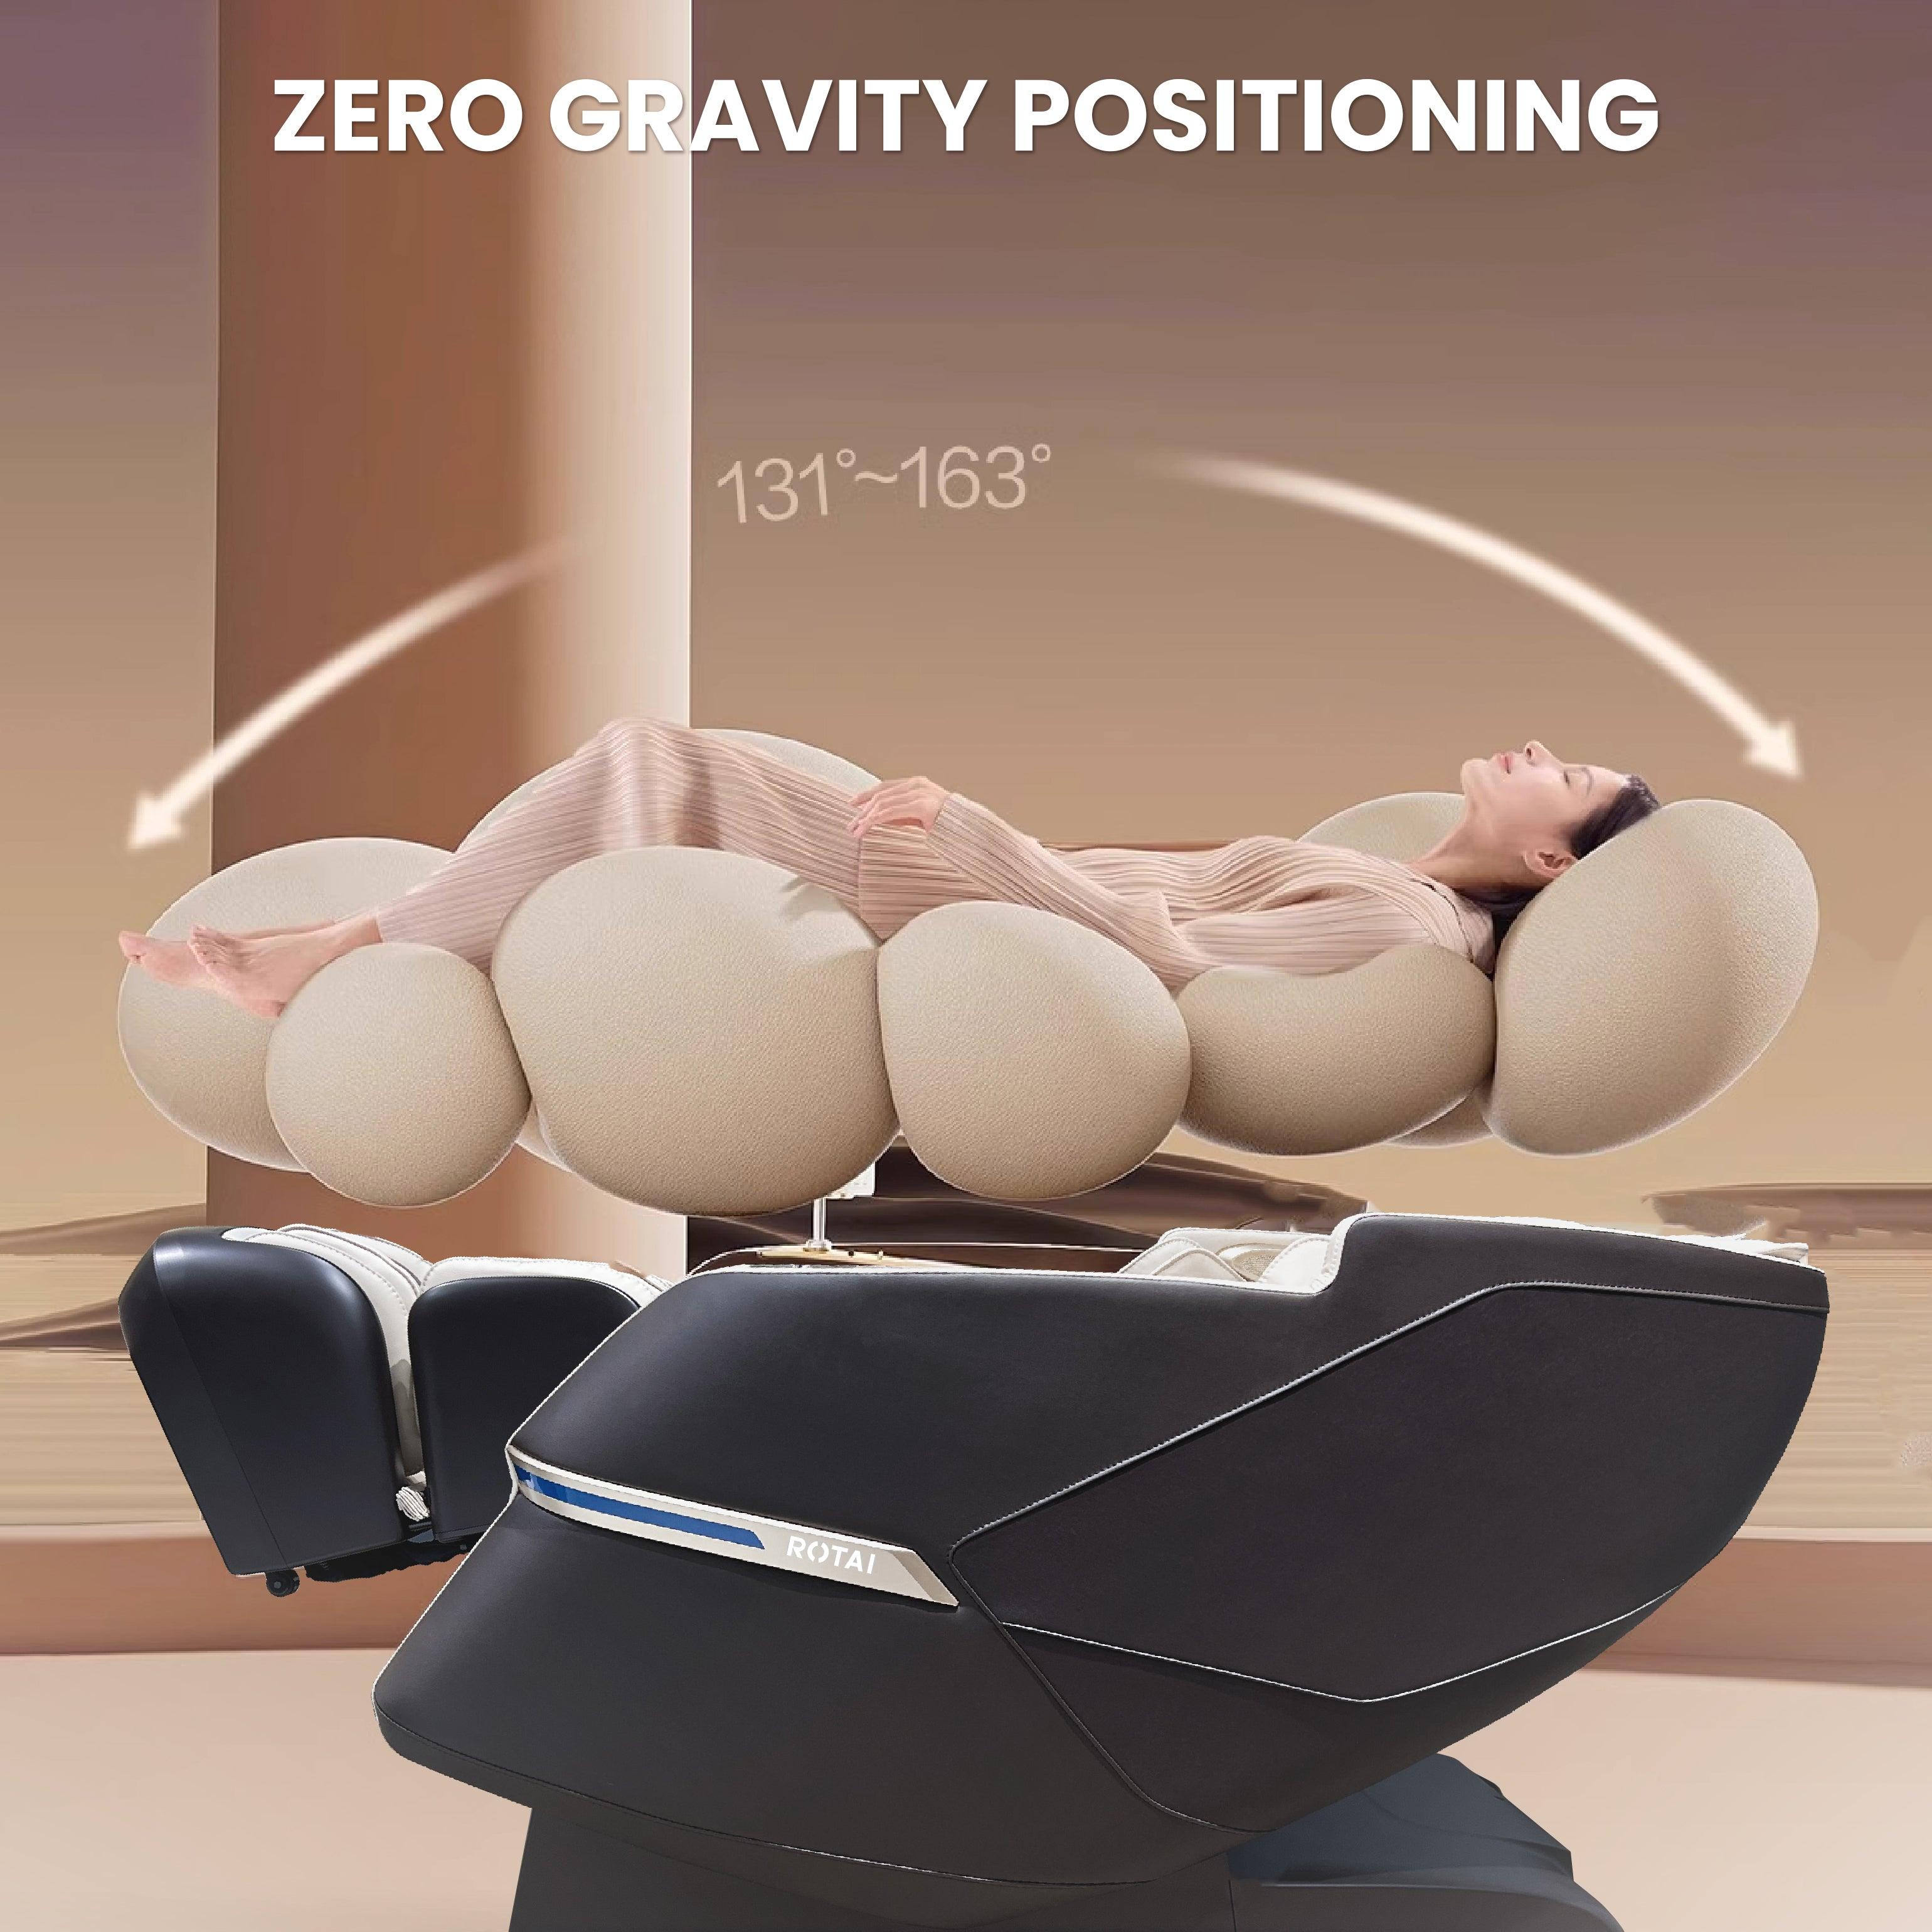 Royal Magestic Pro massage chair in zero gravity position providing ultimate relaxation with advanced AI Smart Massage technology.